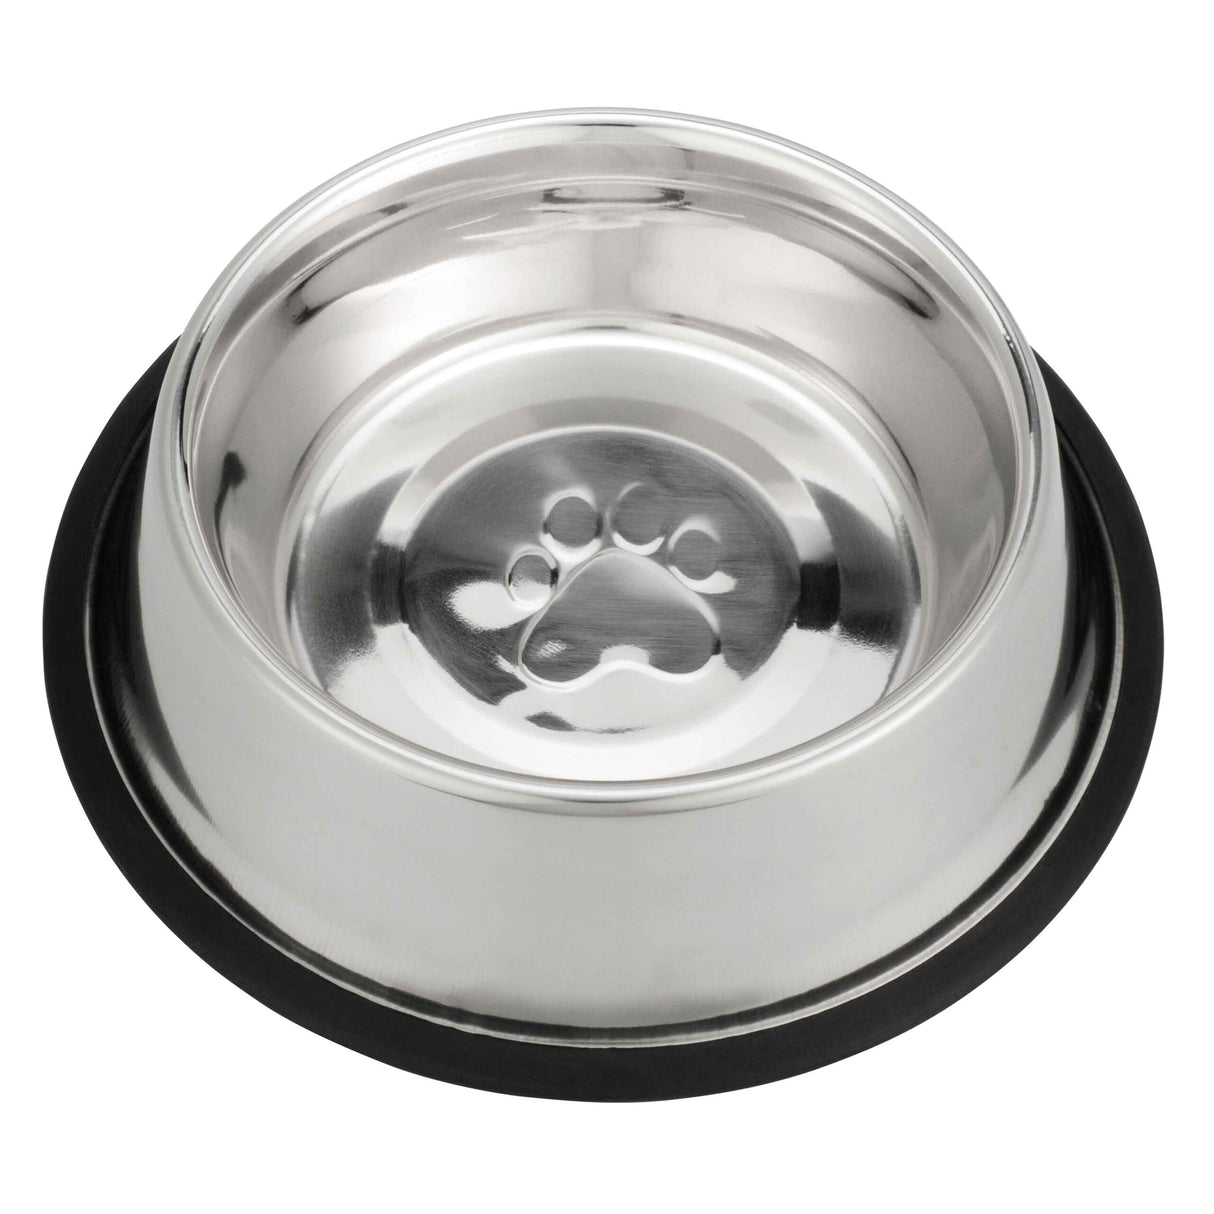 non-tip stainless steel pet bowl 32 ounce